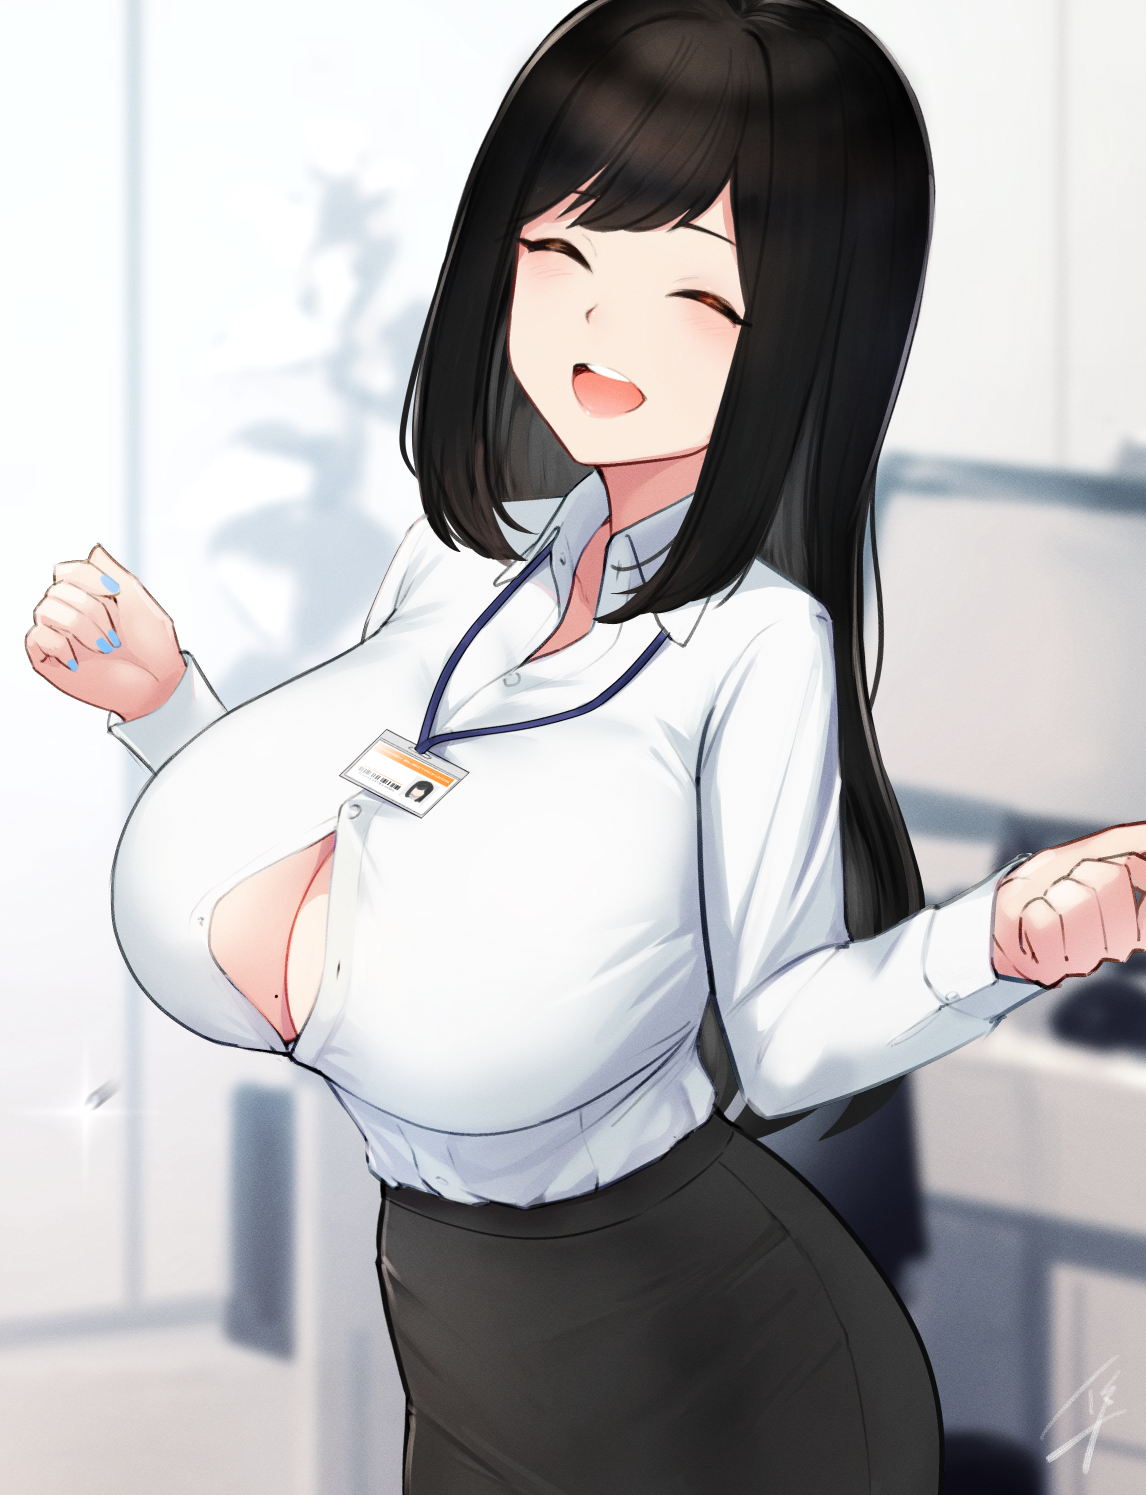 Anime 1146x1495 anime blush nails huge breasts cleavage anime girls original characters closed eyes open mouth black hair office girl artwork Hayabusa (artist) big boobs smiling happy